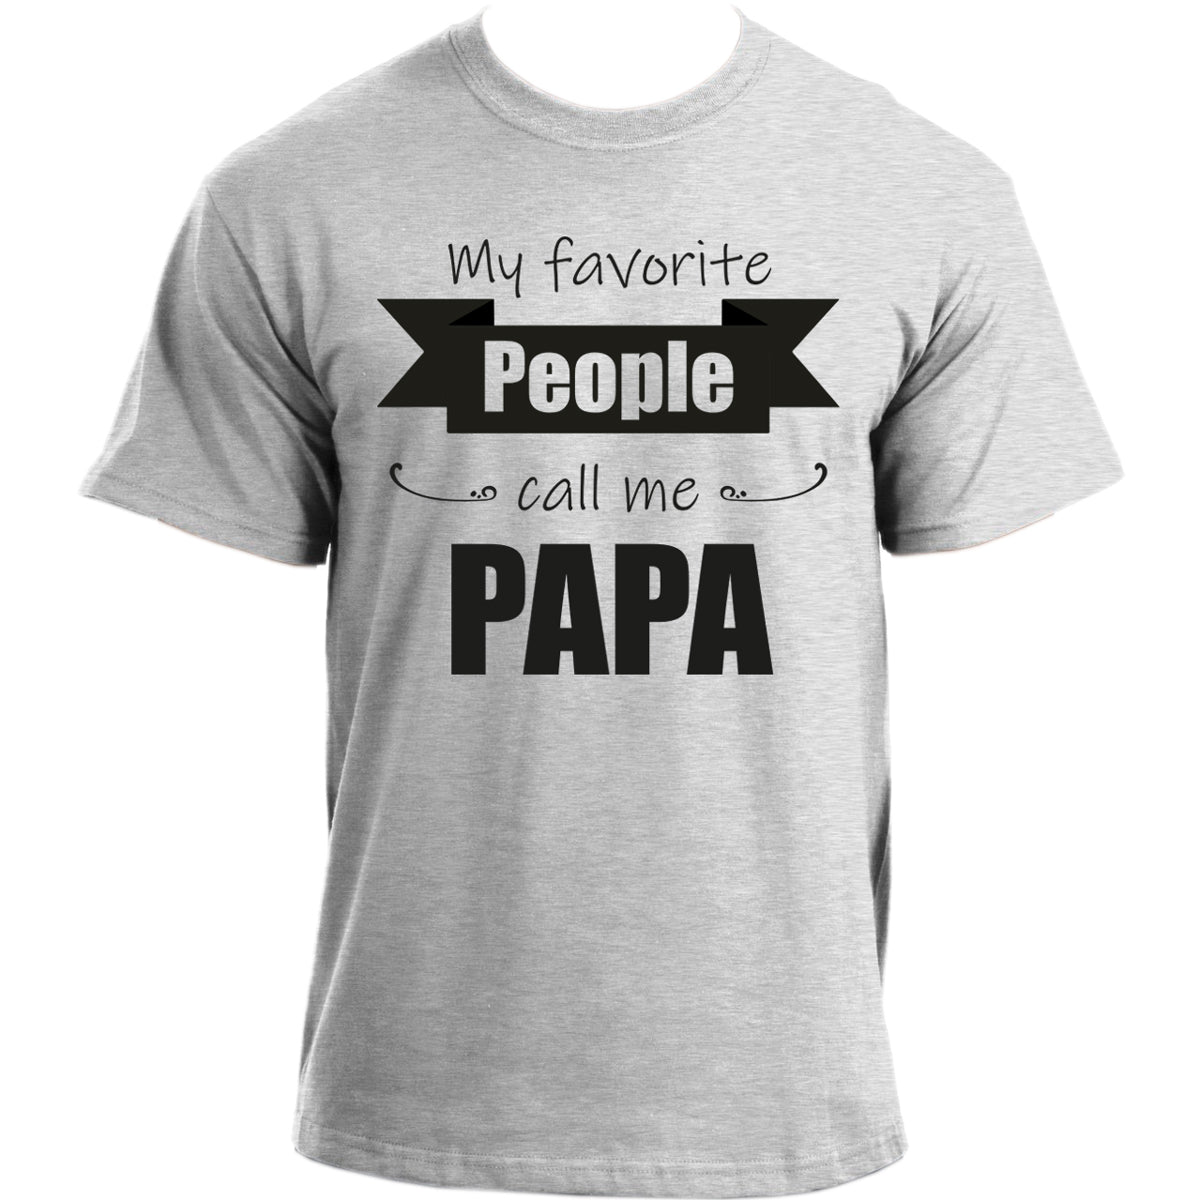 My favourite people call me PAPA T-Shirt | Funny dad short sleeve T shirt for men